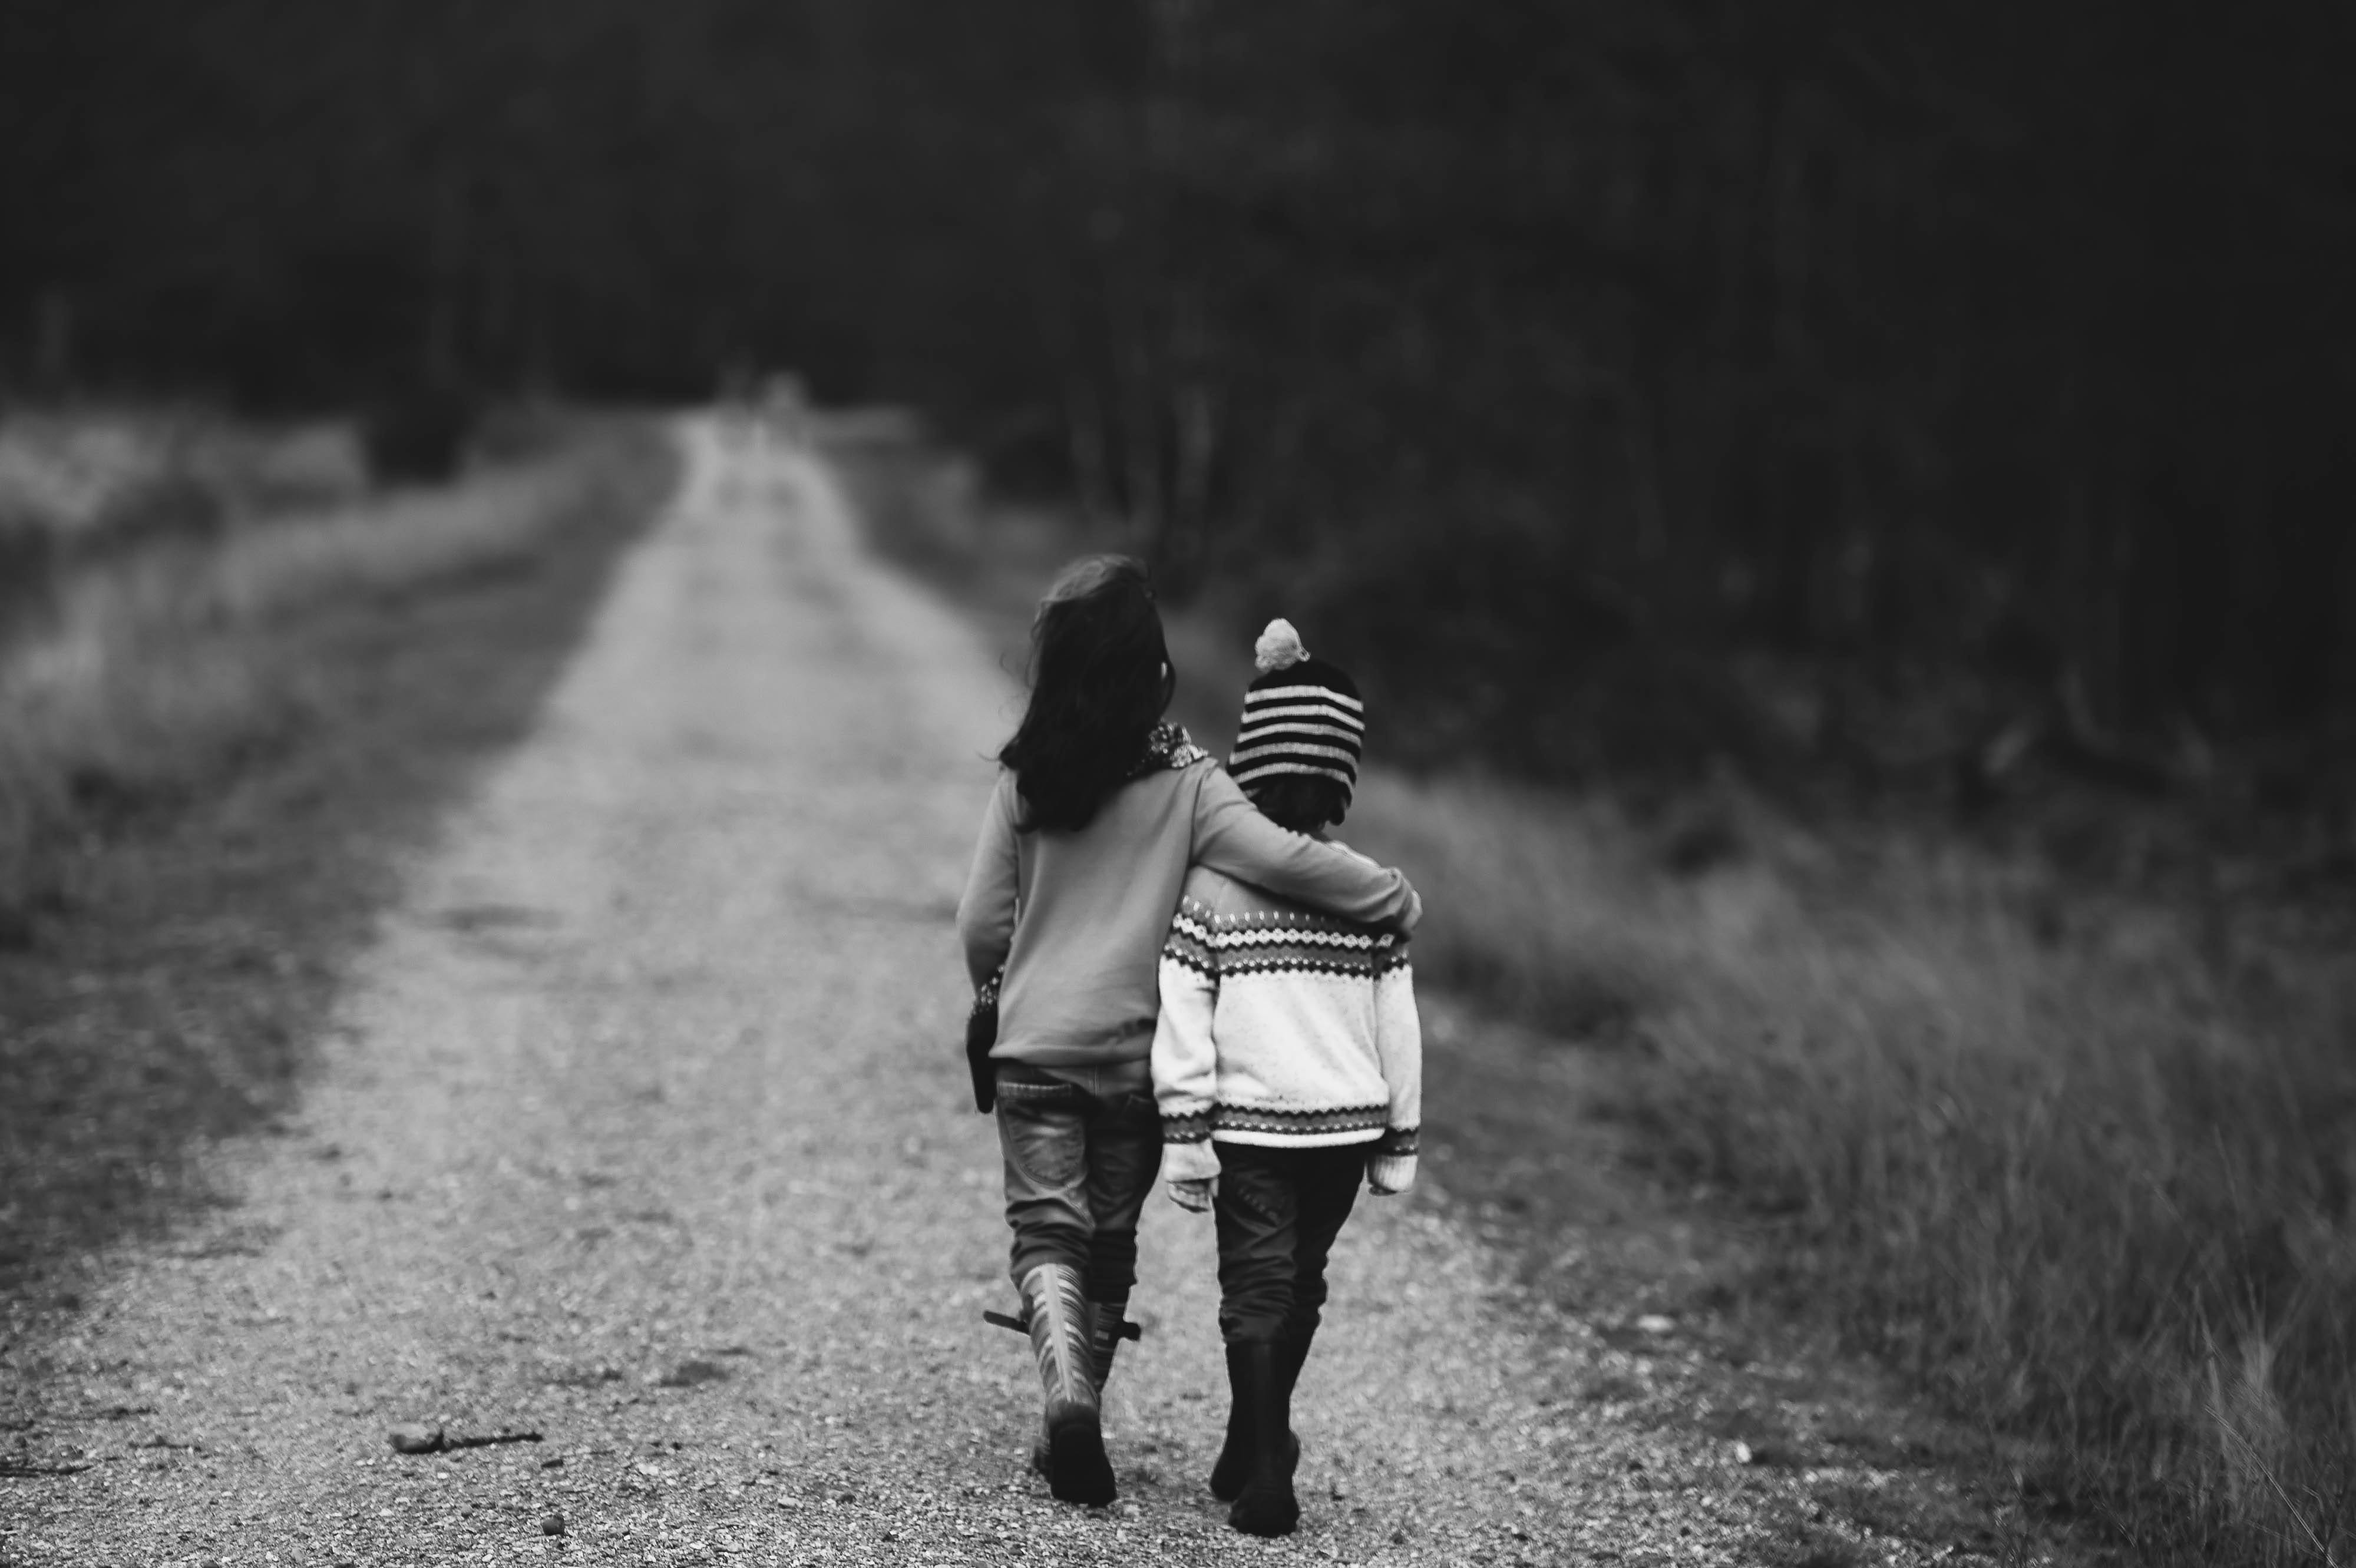 Rear view of 2 young children walking down a deserted dirt road. The taller has their arm around the smaller one’s shoulders.